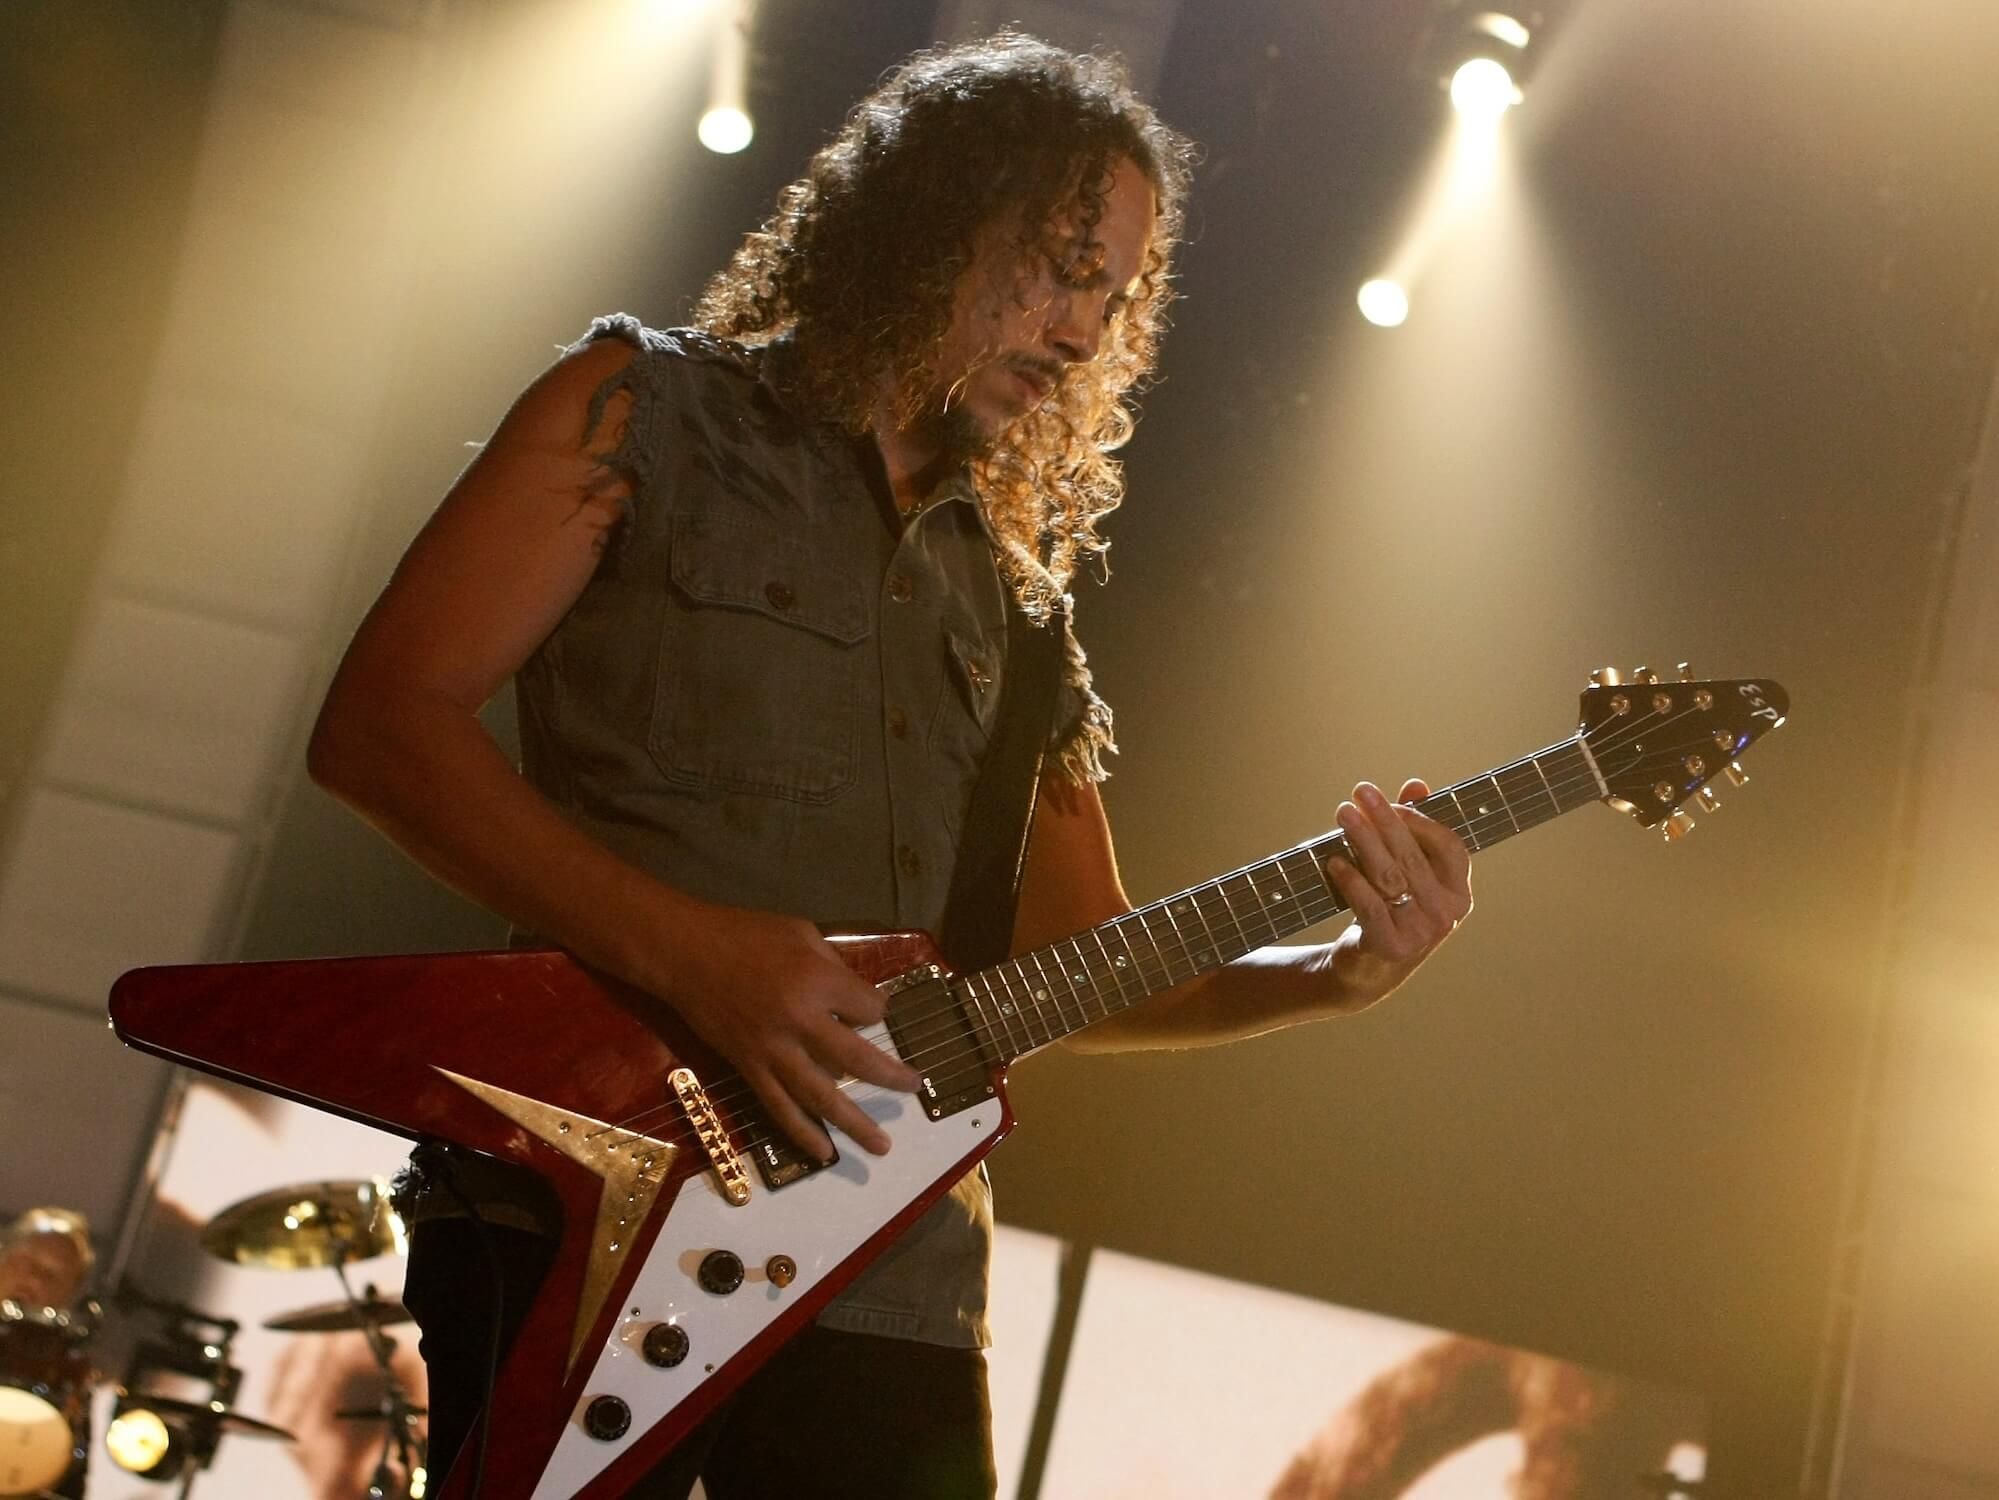 Hammett playing an ESP-made V-type guitar in 2008, photo by Kevin Winter/Getty Images